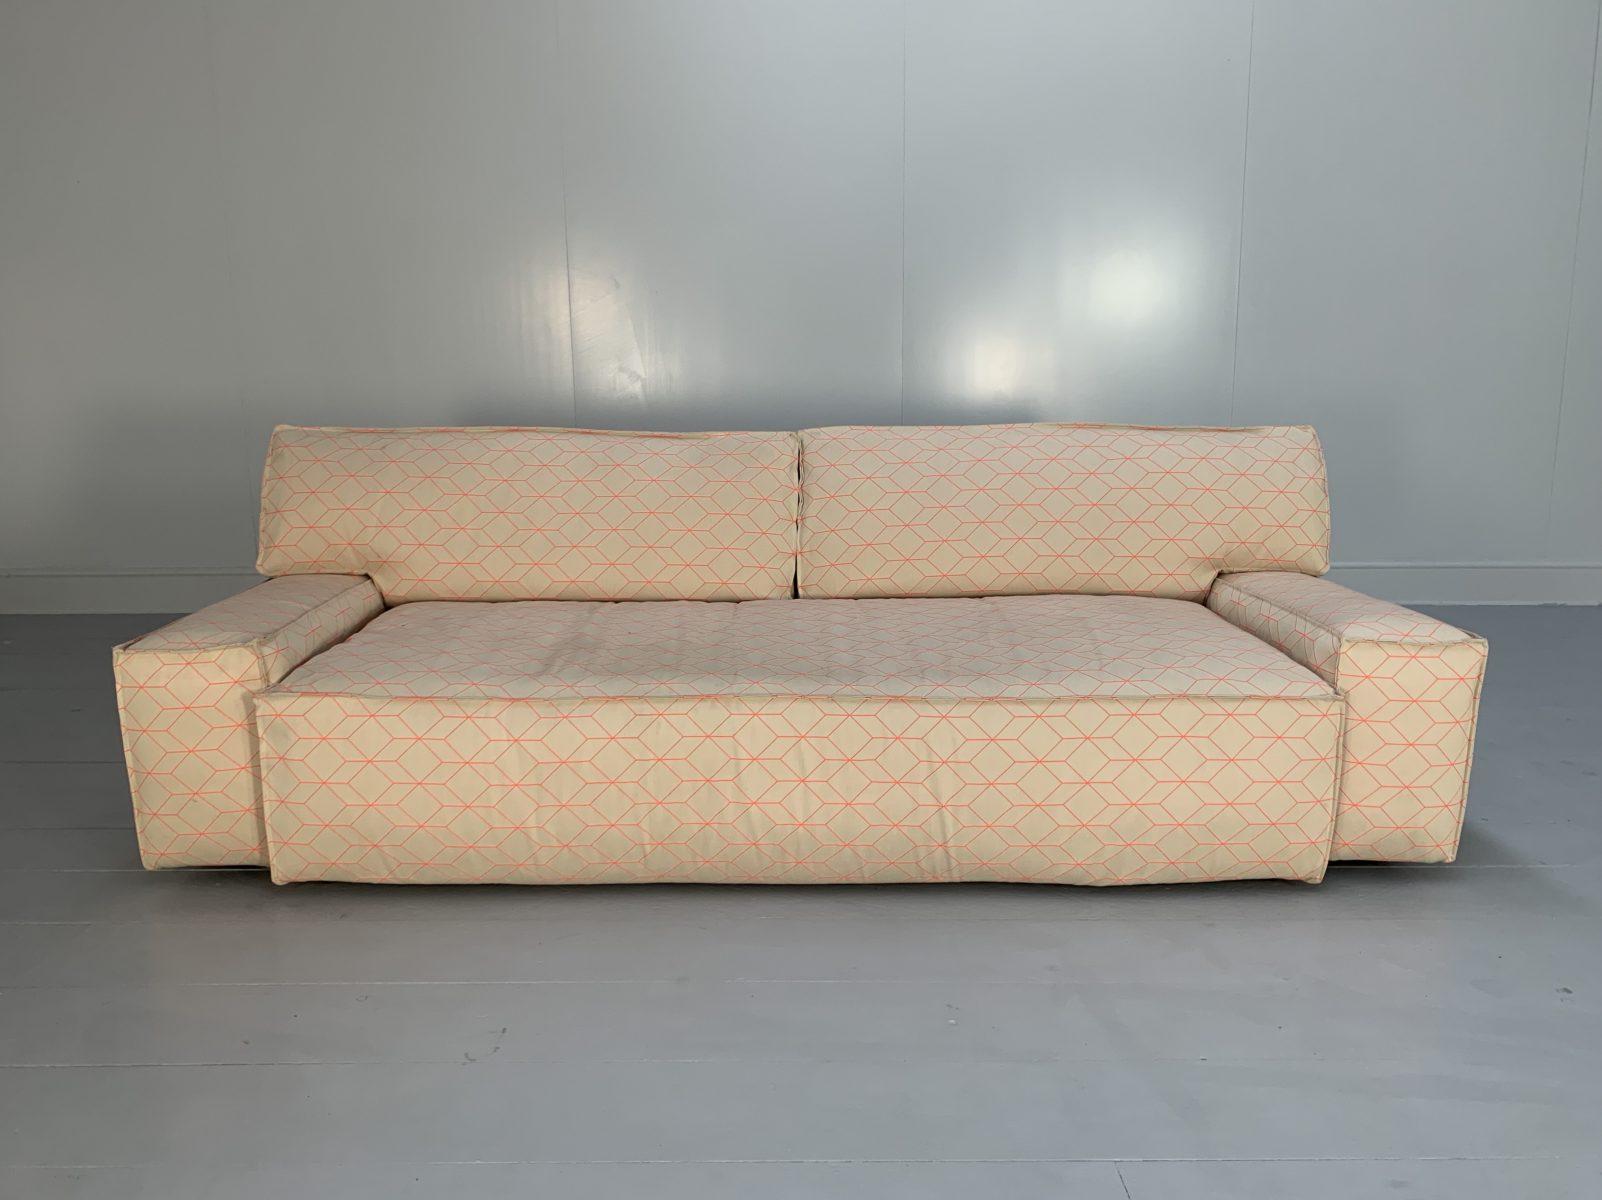 Cassina “MyWorld” 4-Seat Sectional Sofa in Geometric-Print Canvas For Sale 4